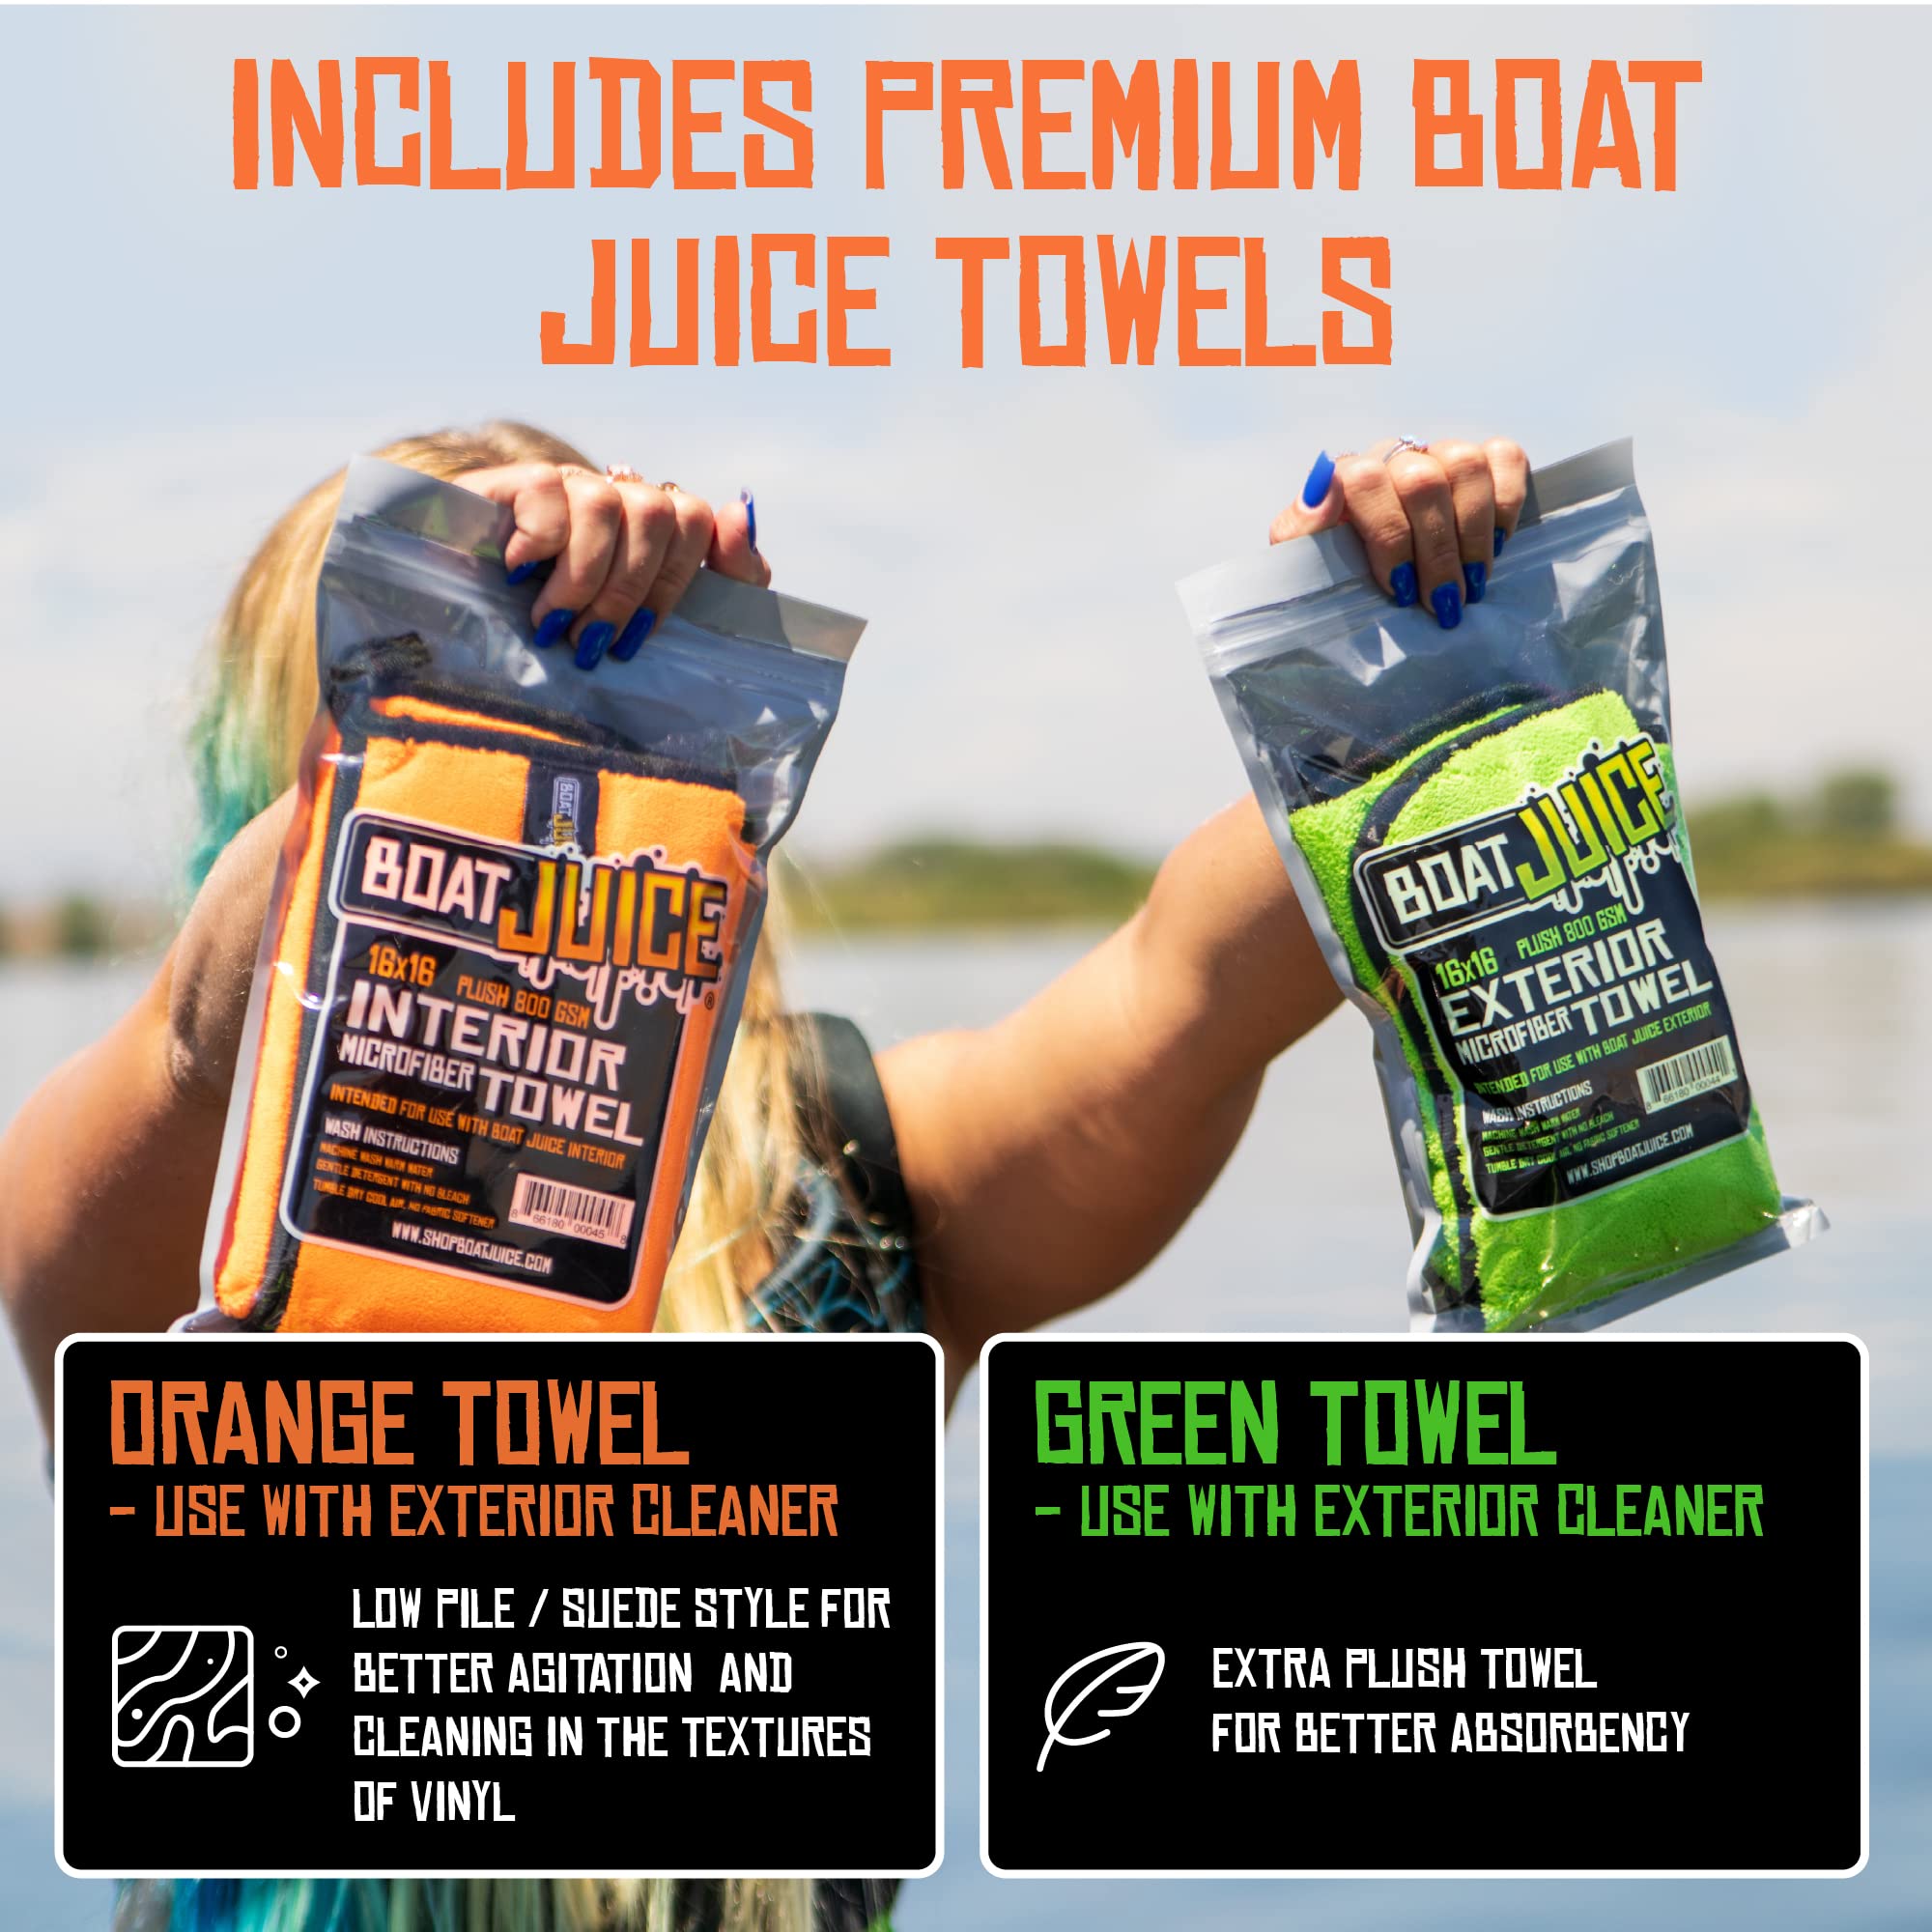 Boat Juice Boat Cleaning Kit - Exterior Boat Cleaner Water Spot Remover, Interior Boat Cleaner for Seats & Vinyl, 2 Microfiber Towels - Boat Cleaning Supplies, Boat Accessories (Kit)